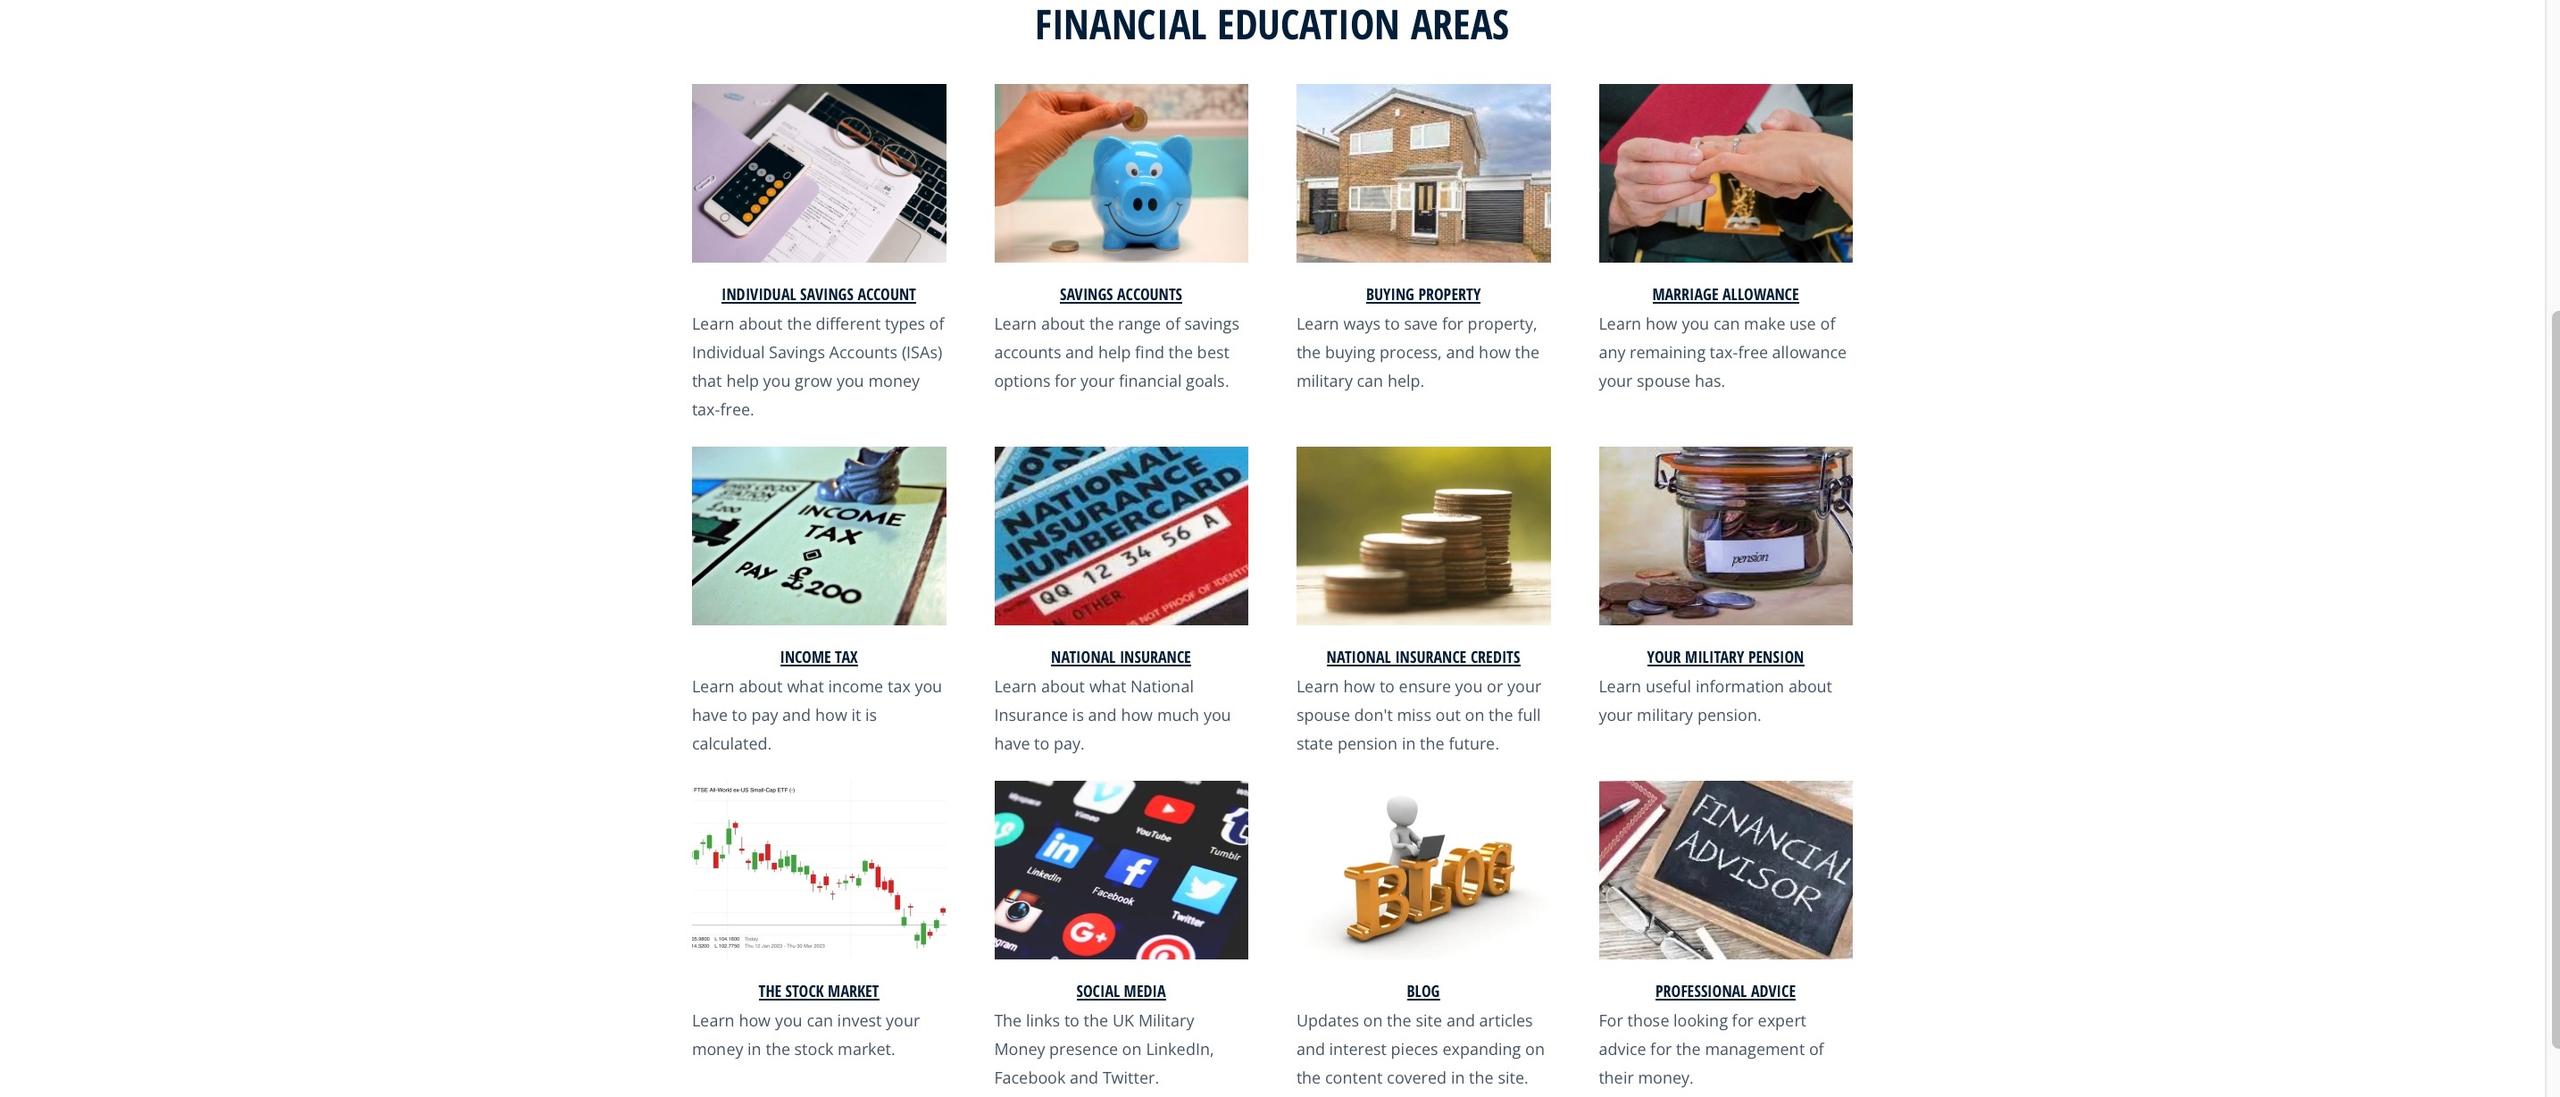 Further topics and areas to expand you financial education.